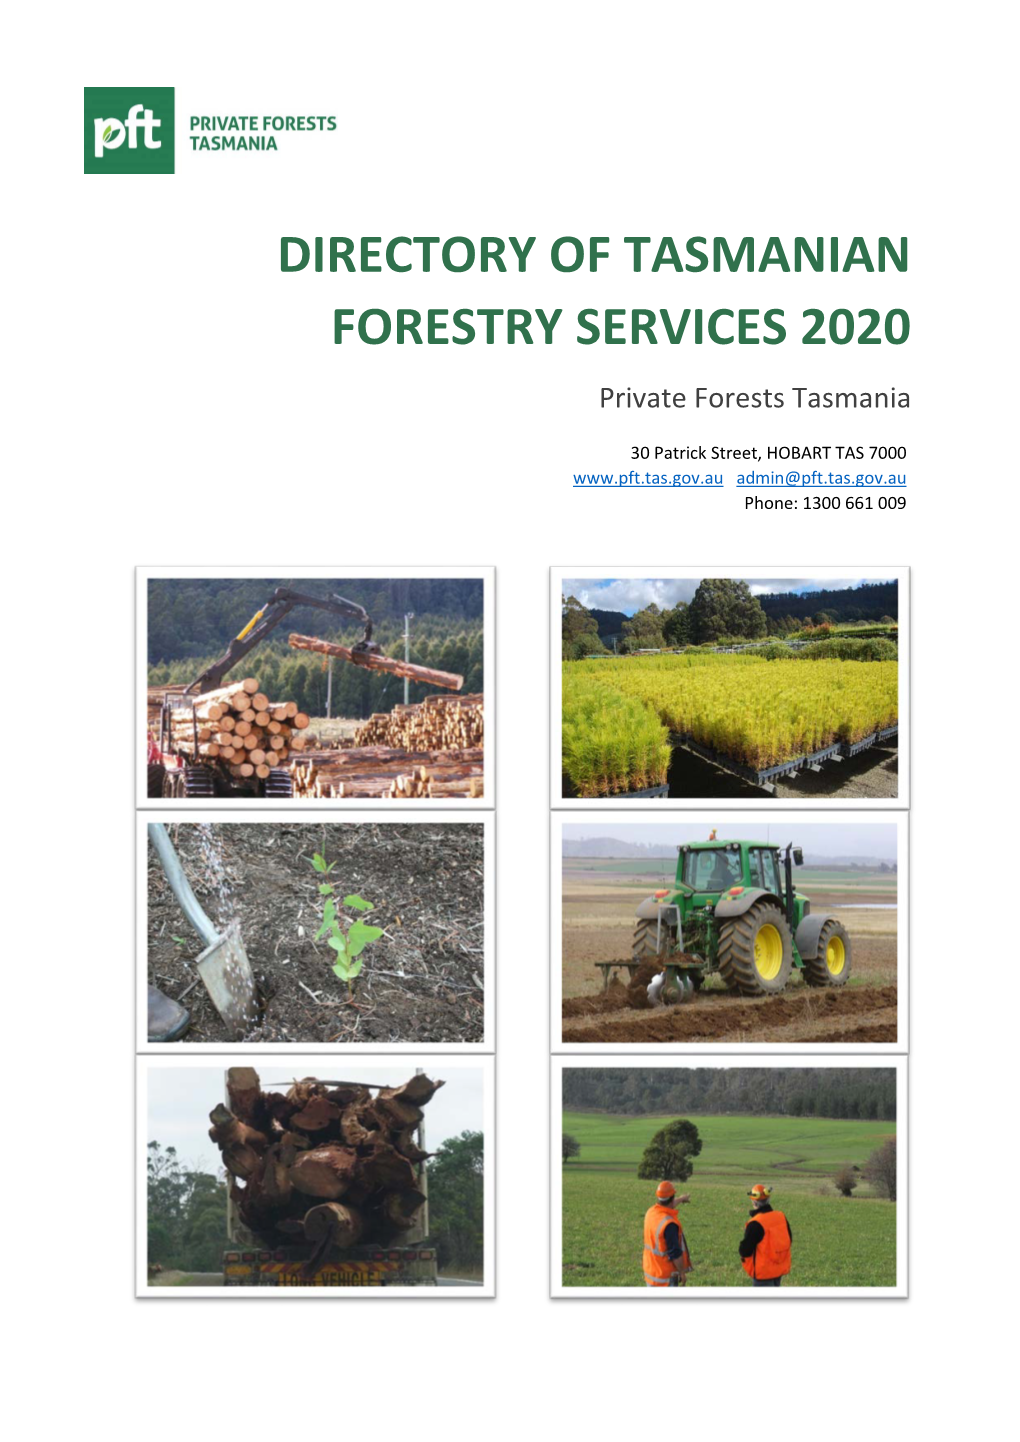 DIRECTORY of TASMANIAN FORESTRY SERVICES 2020 Private Forests Tasmania